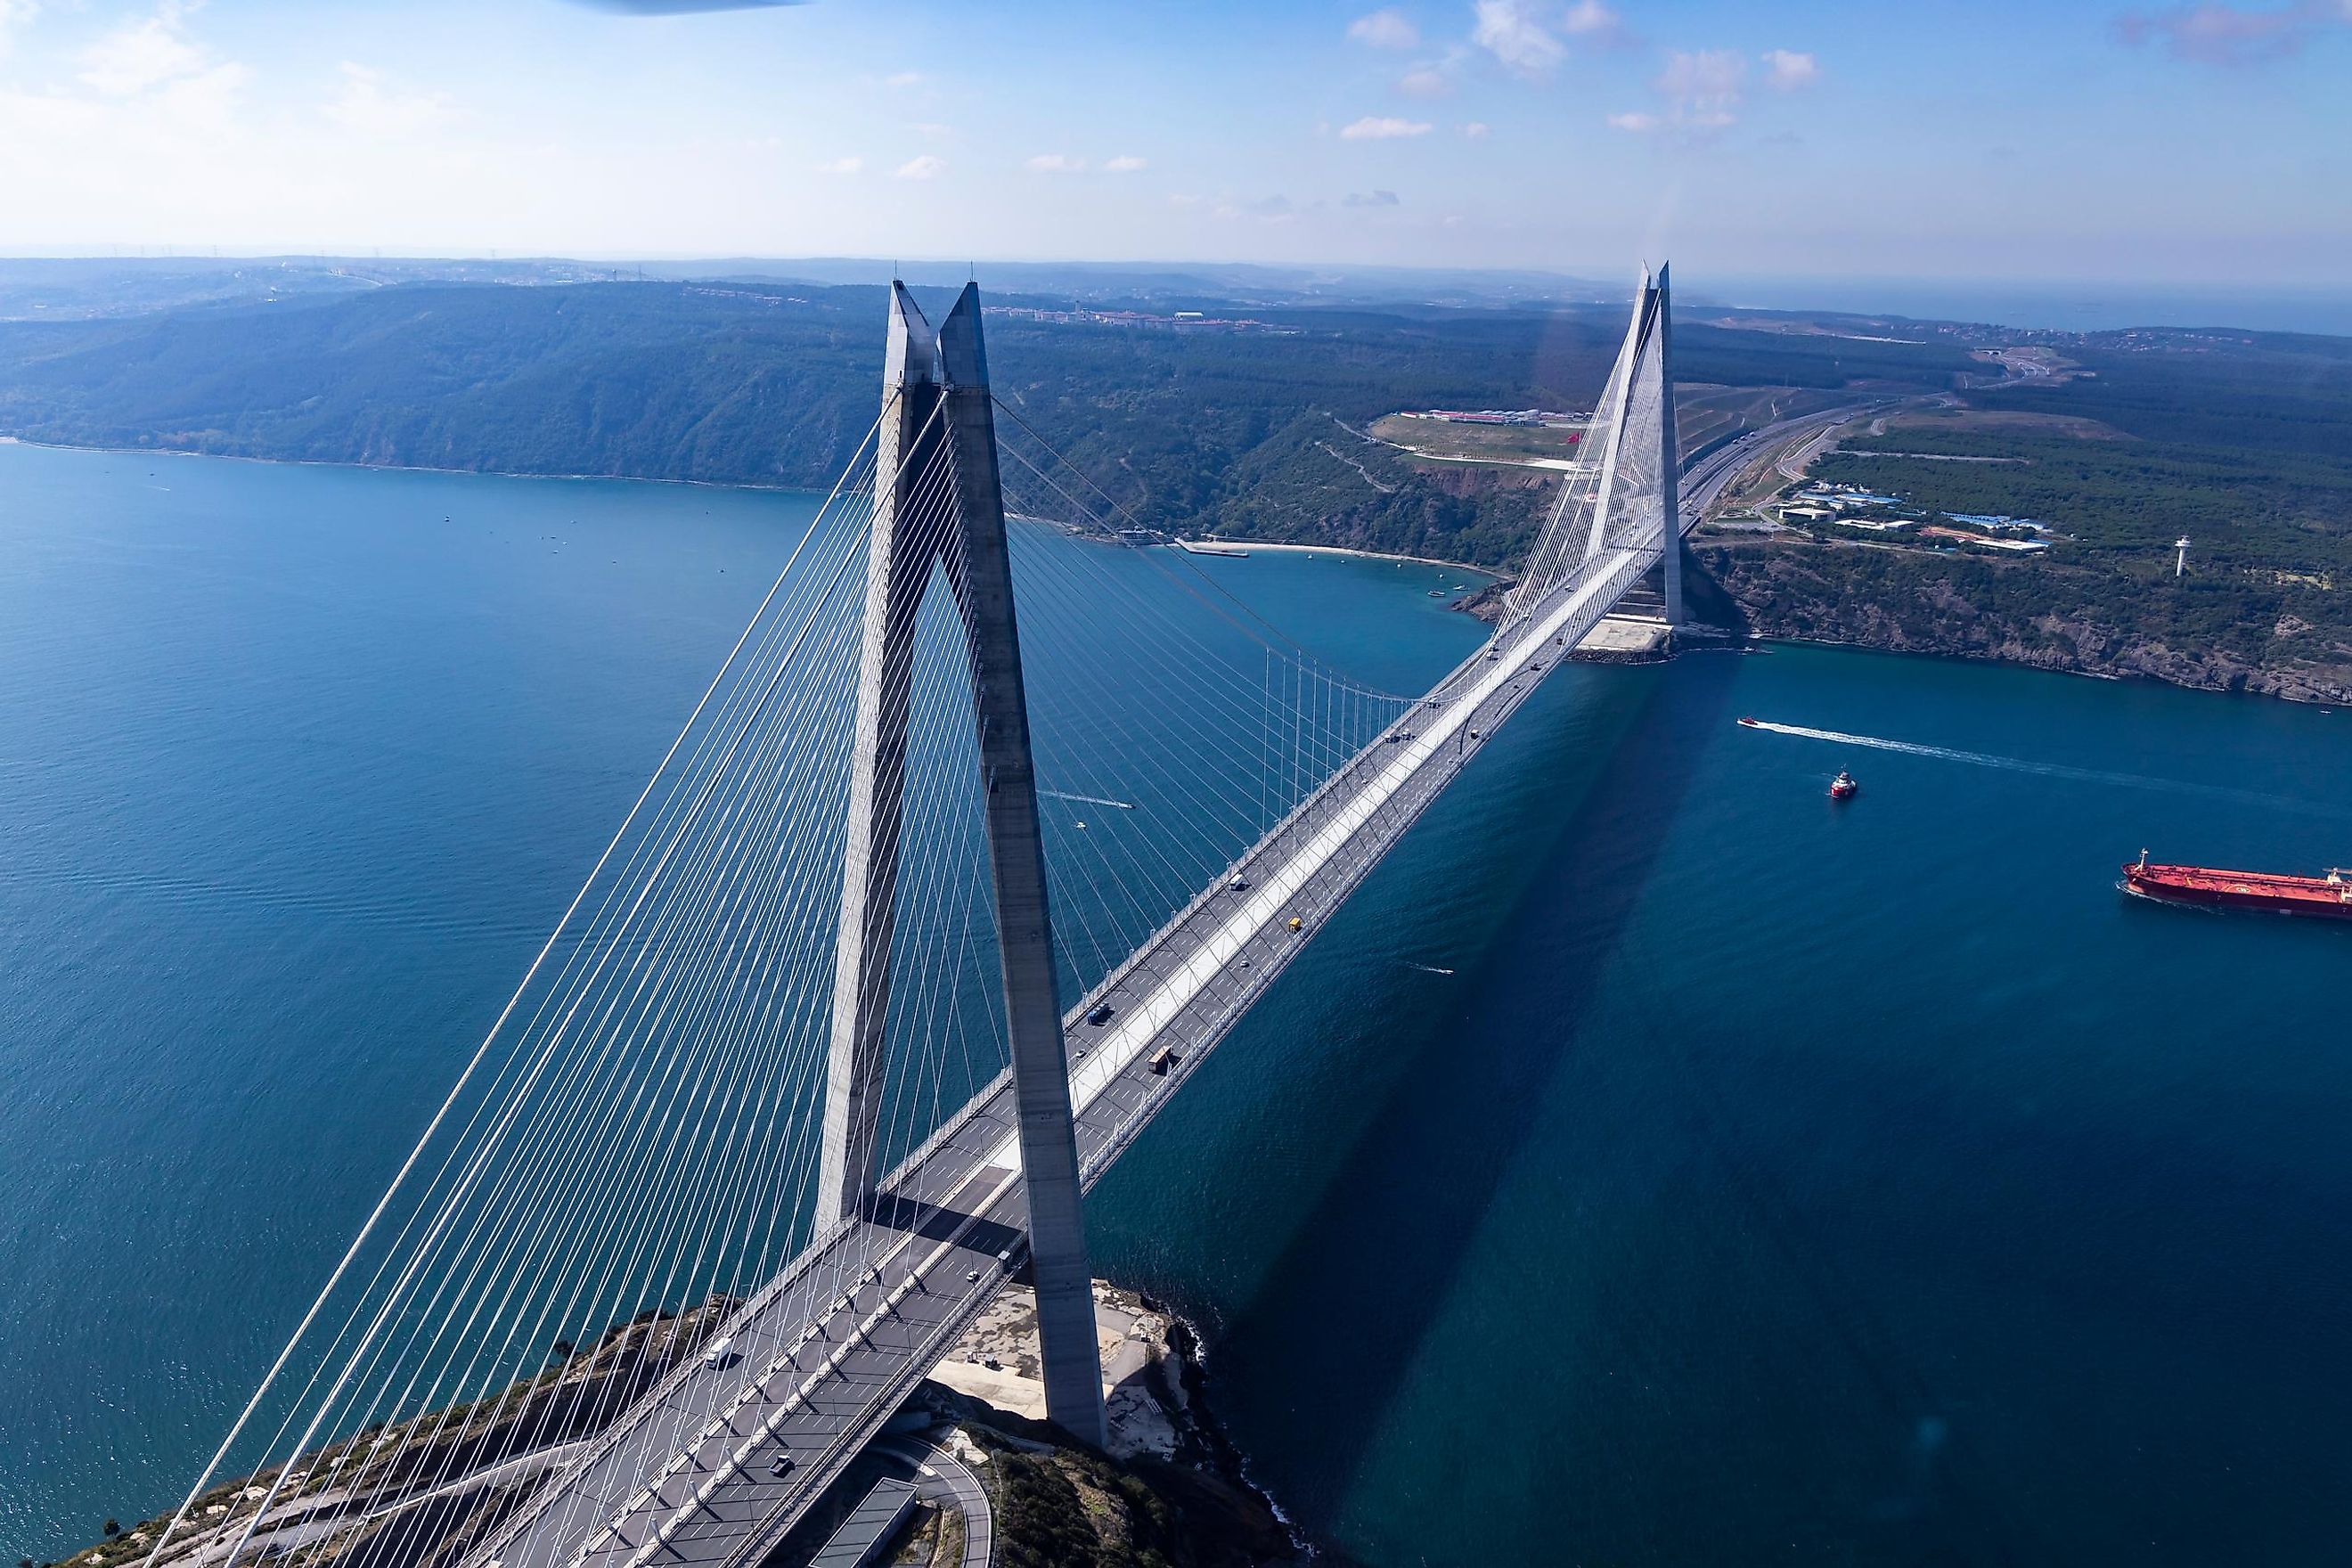 Whats The Tallest Bridge In The United States - www.inf-inet.com